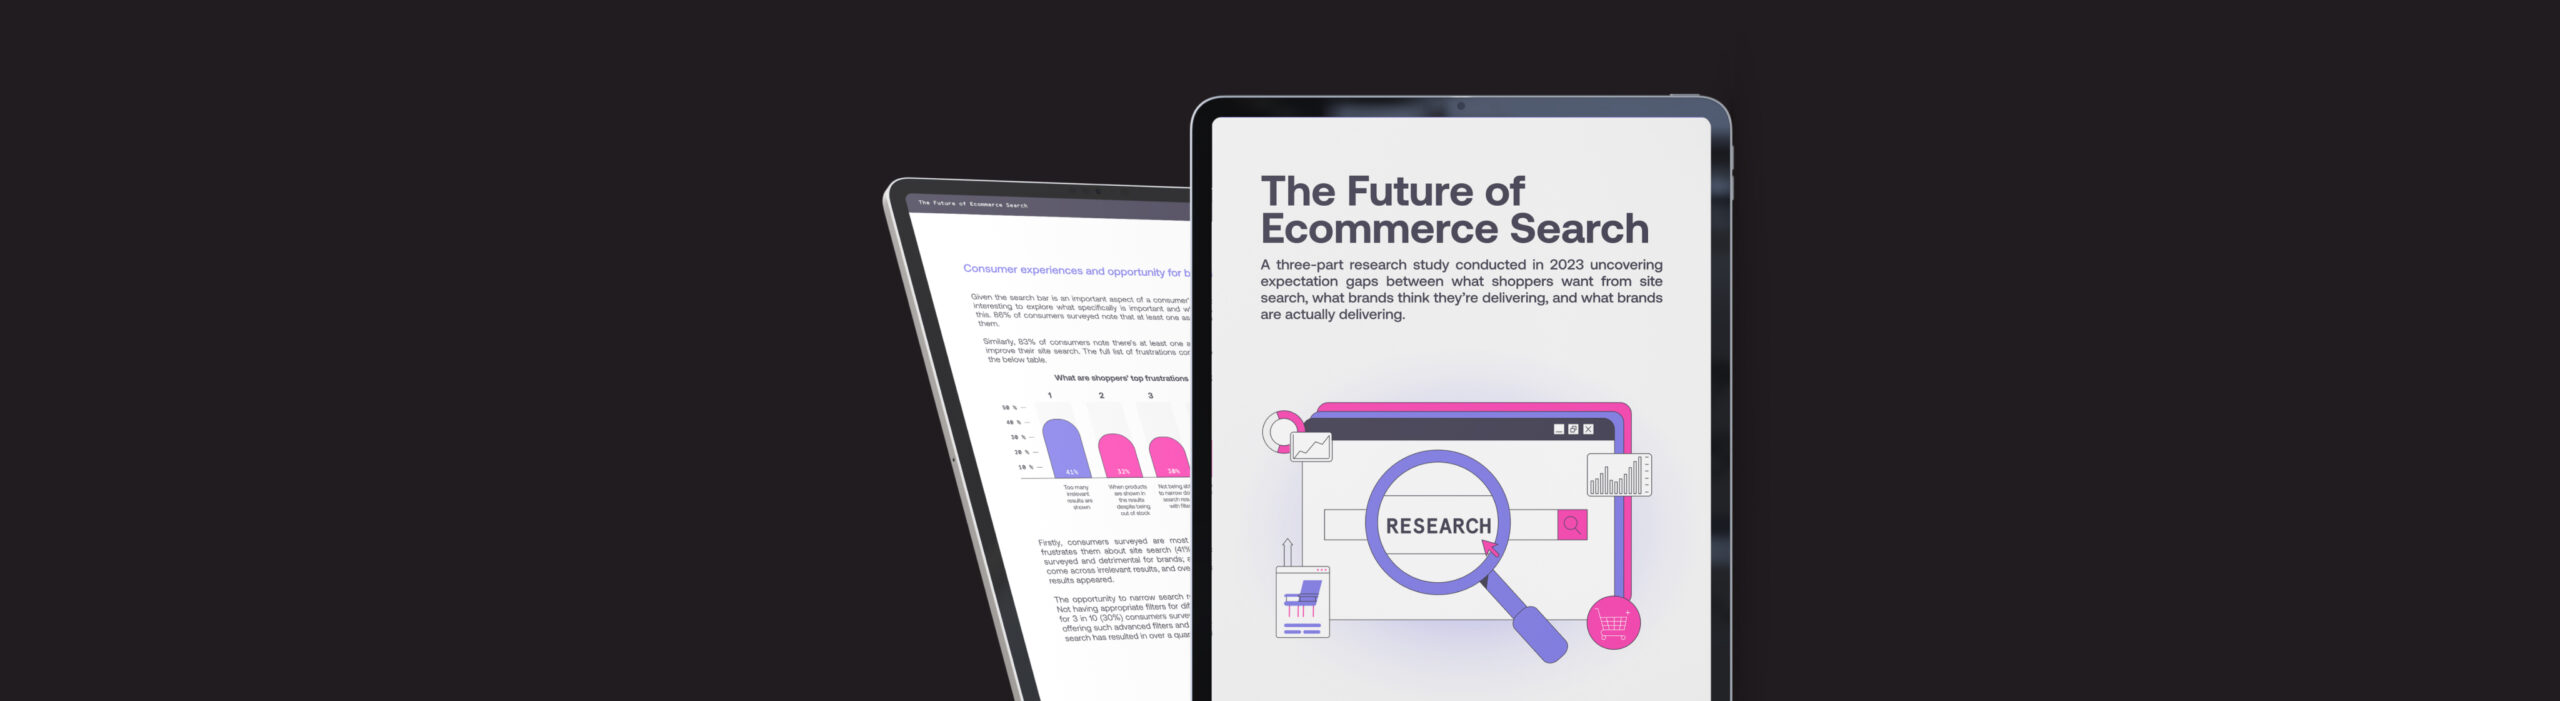 Research: The Future of Ecommerce Search